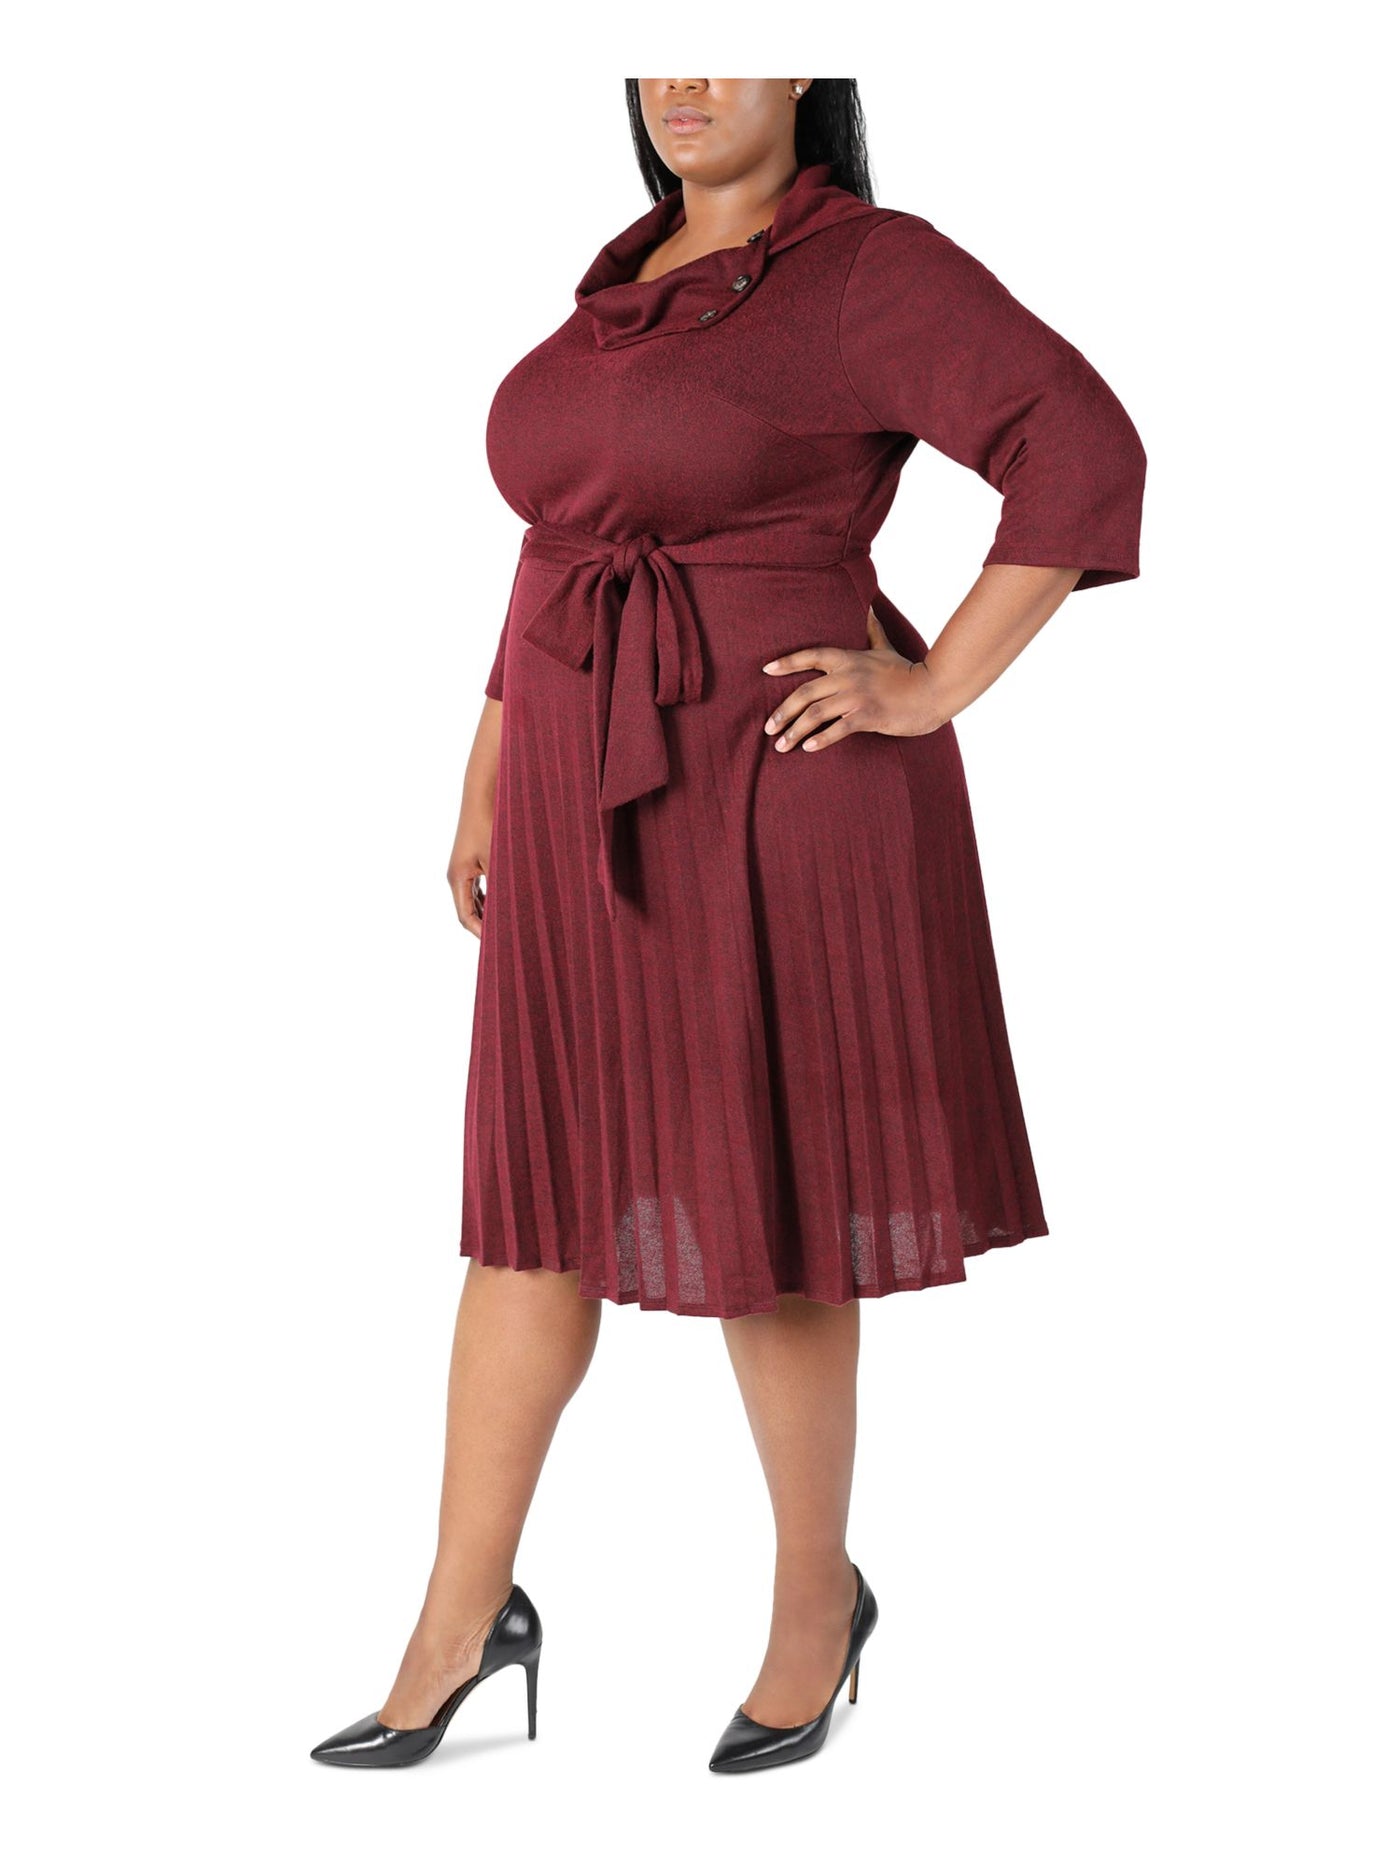 ROBBIE BEE Womens Burgundy Knit Pleated Belted Button Heather 3/4 Sleeve Cowl Neck Below The Knee Wear To Work Sheath Dress Plus 1X